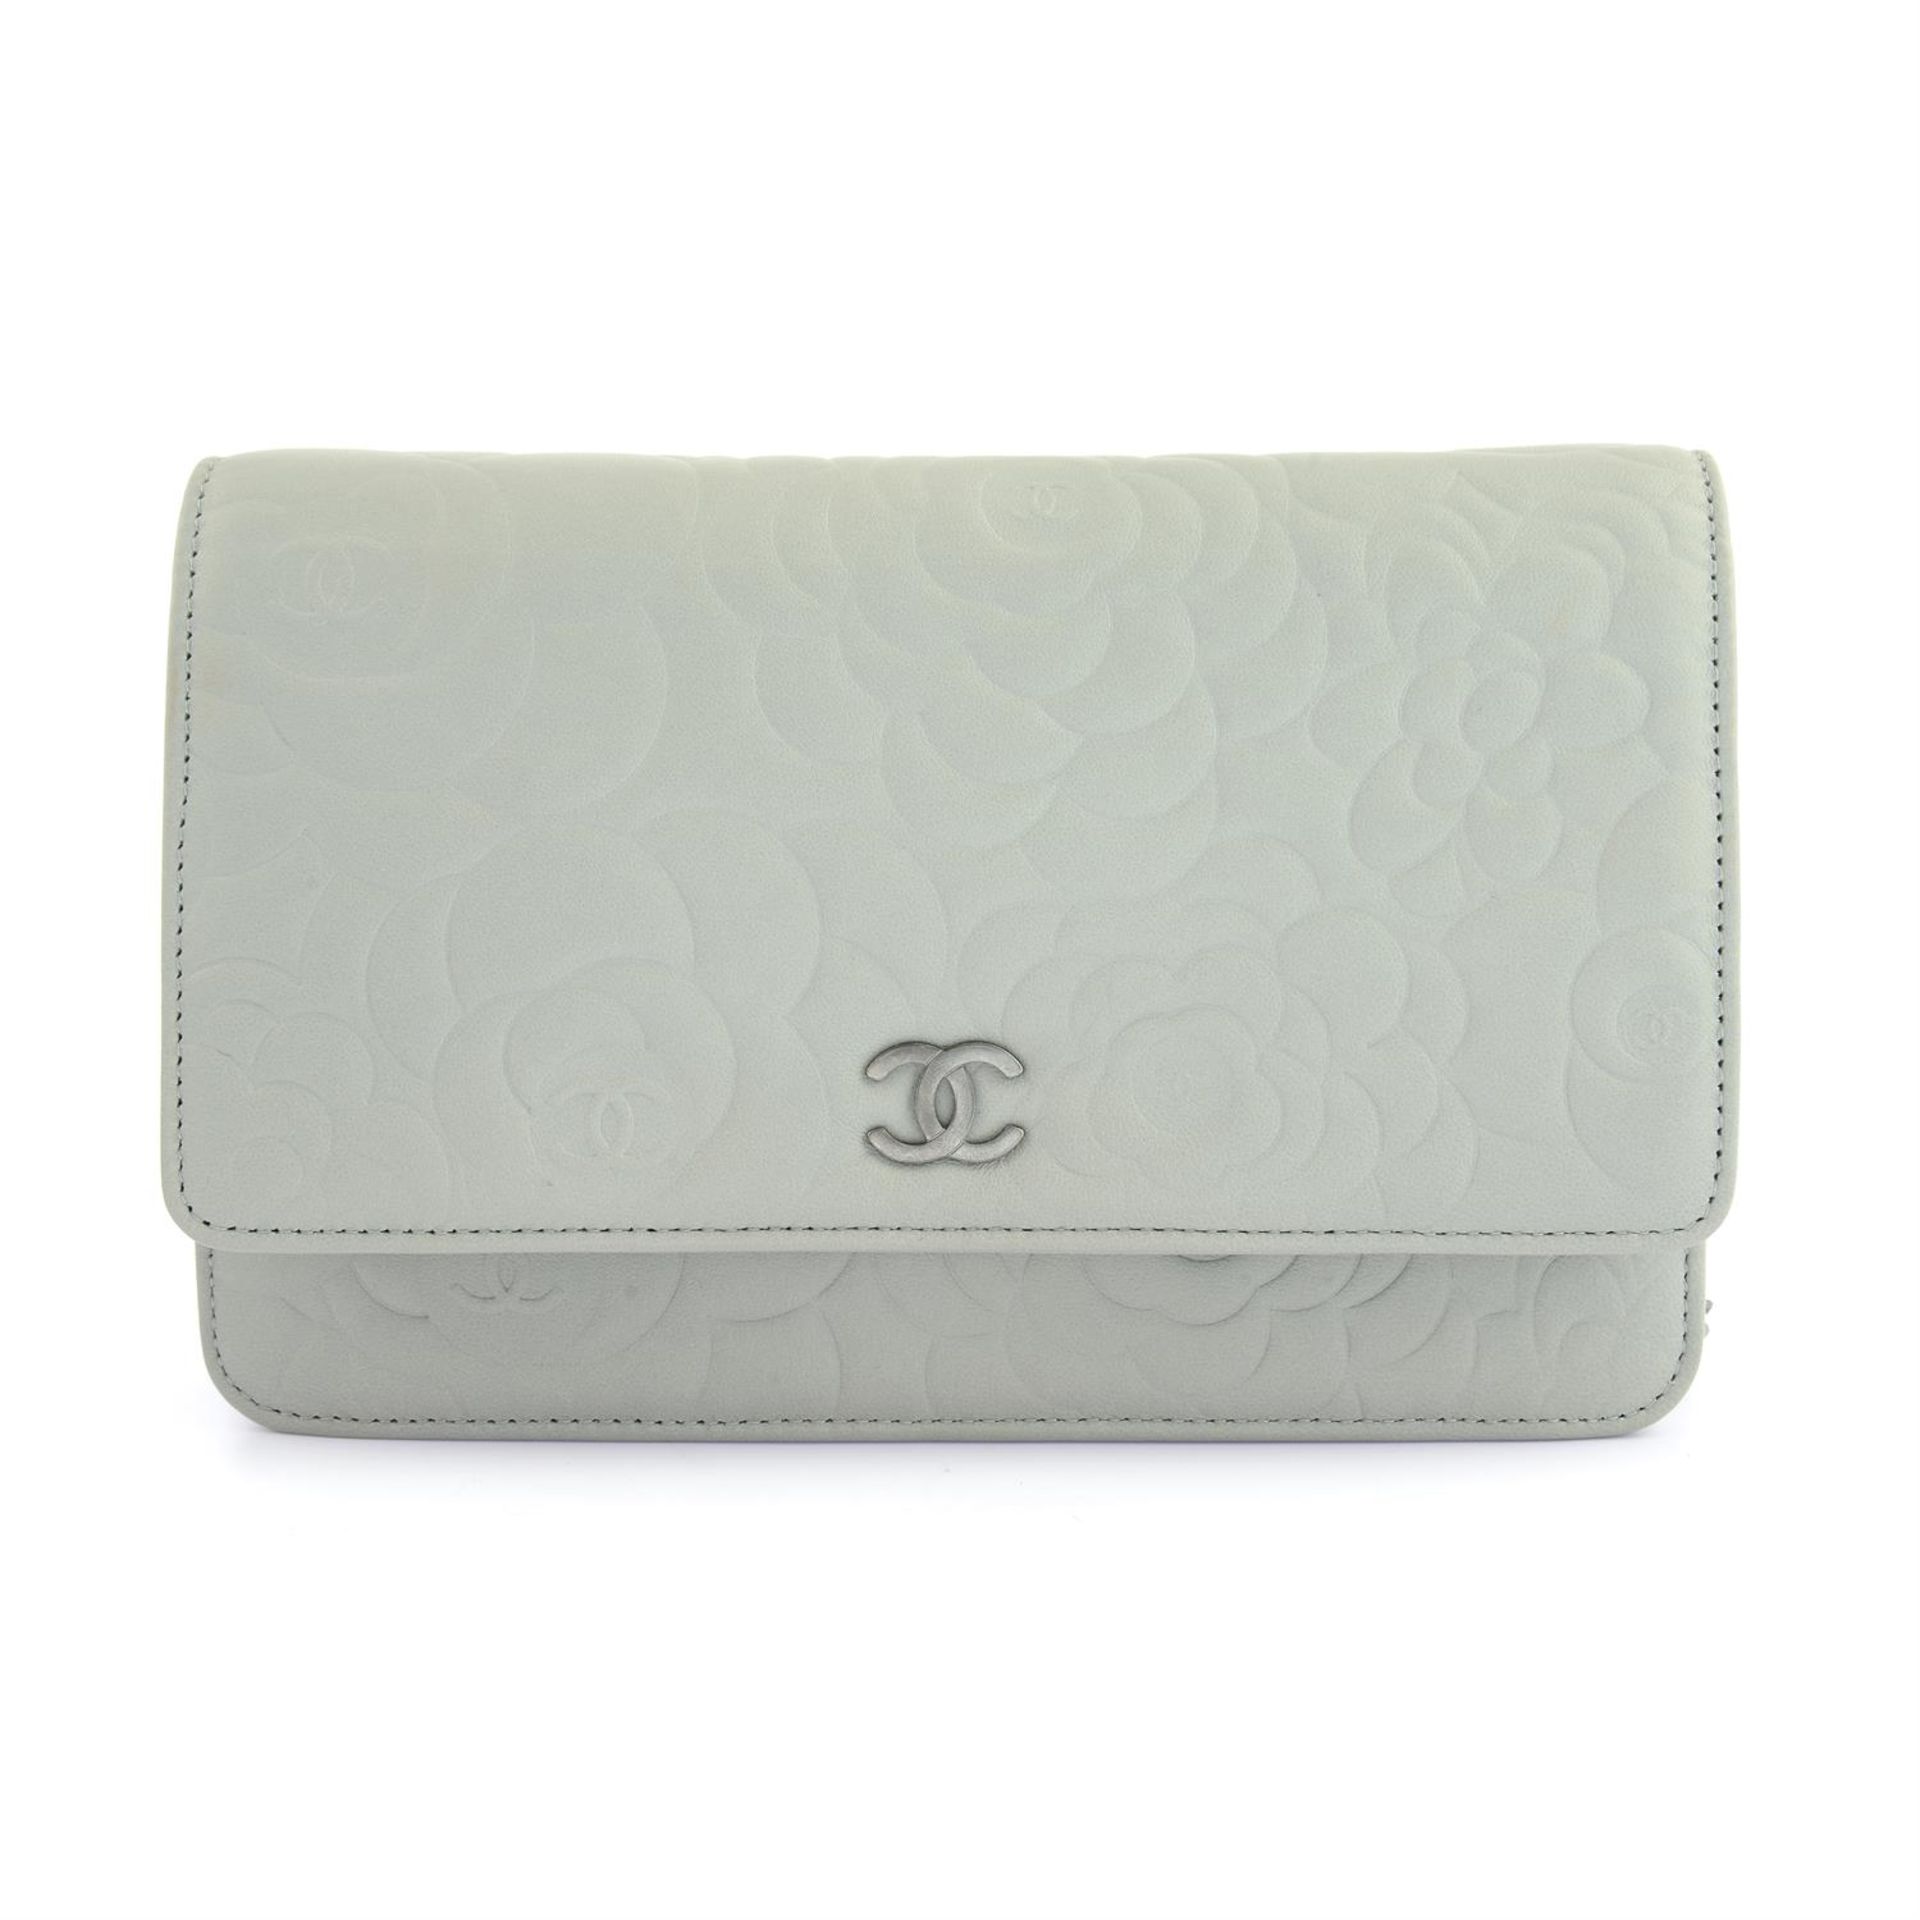 CHANEL - a light grey Camelia embossed leather wallet on chain.